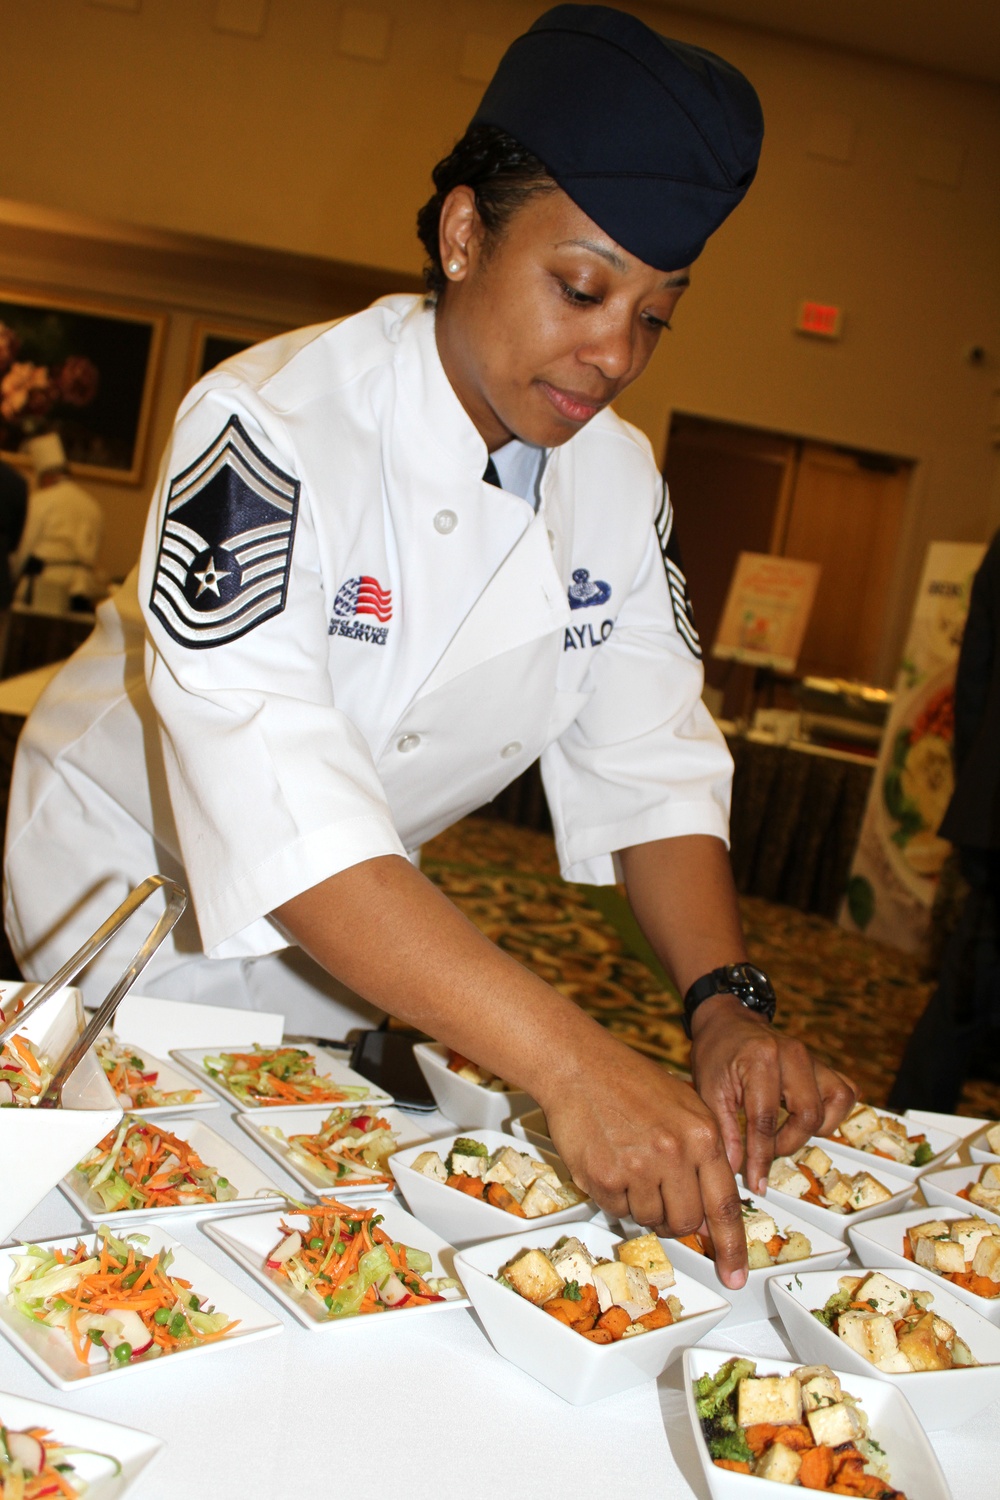 HFI delivers nutritious, tasty food